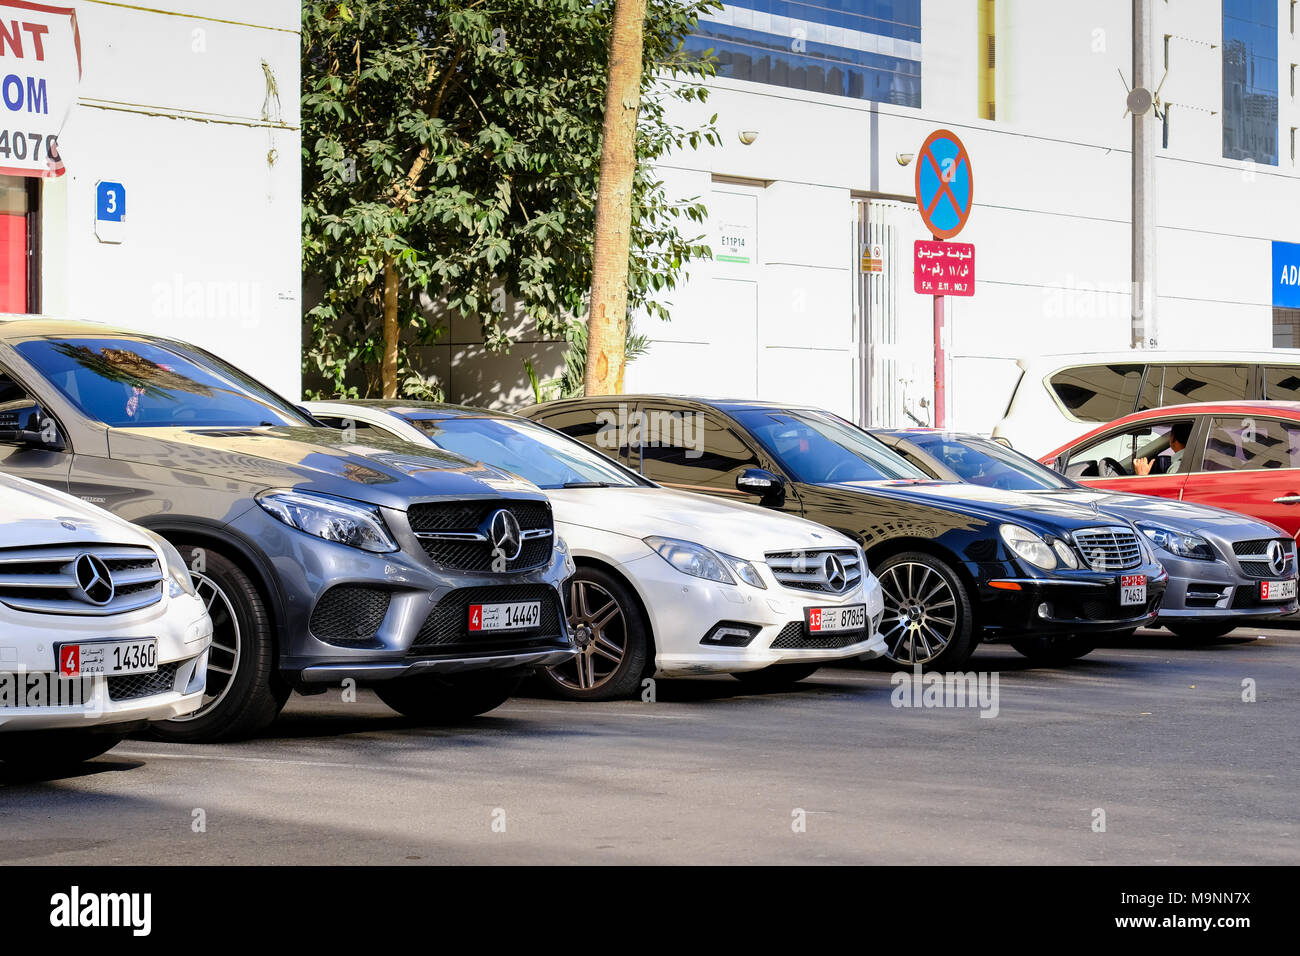 All Vehicle are Mercedes brand, parked in neighborhood parking Stock Photo  - Alamy